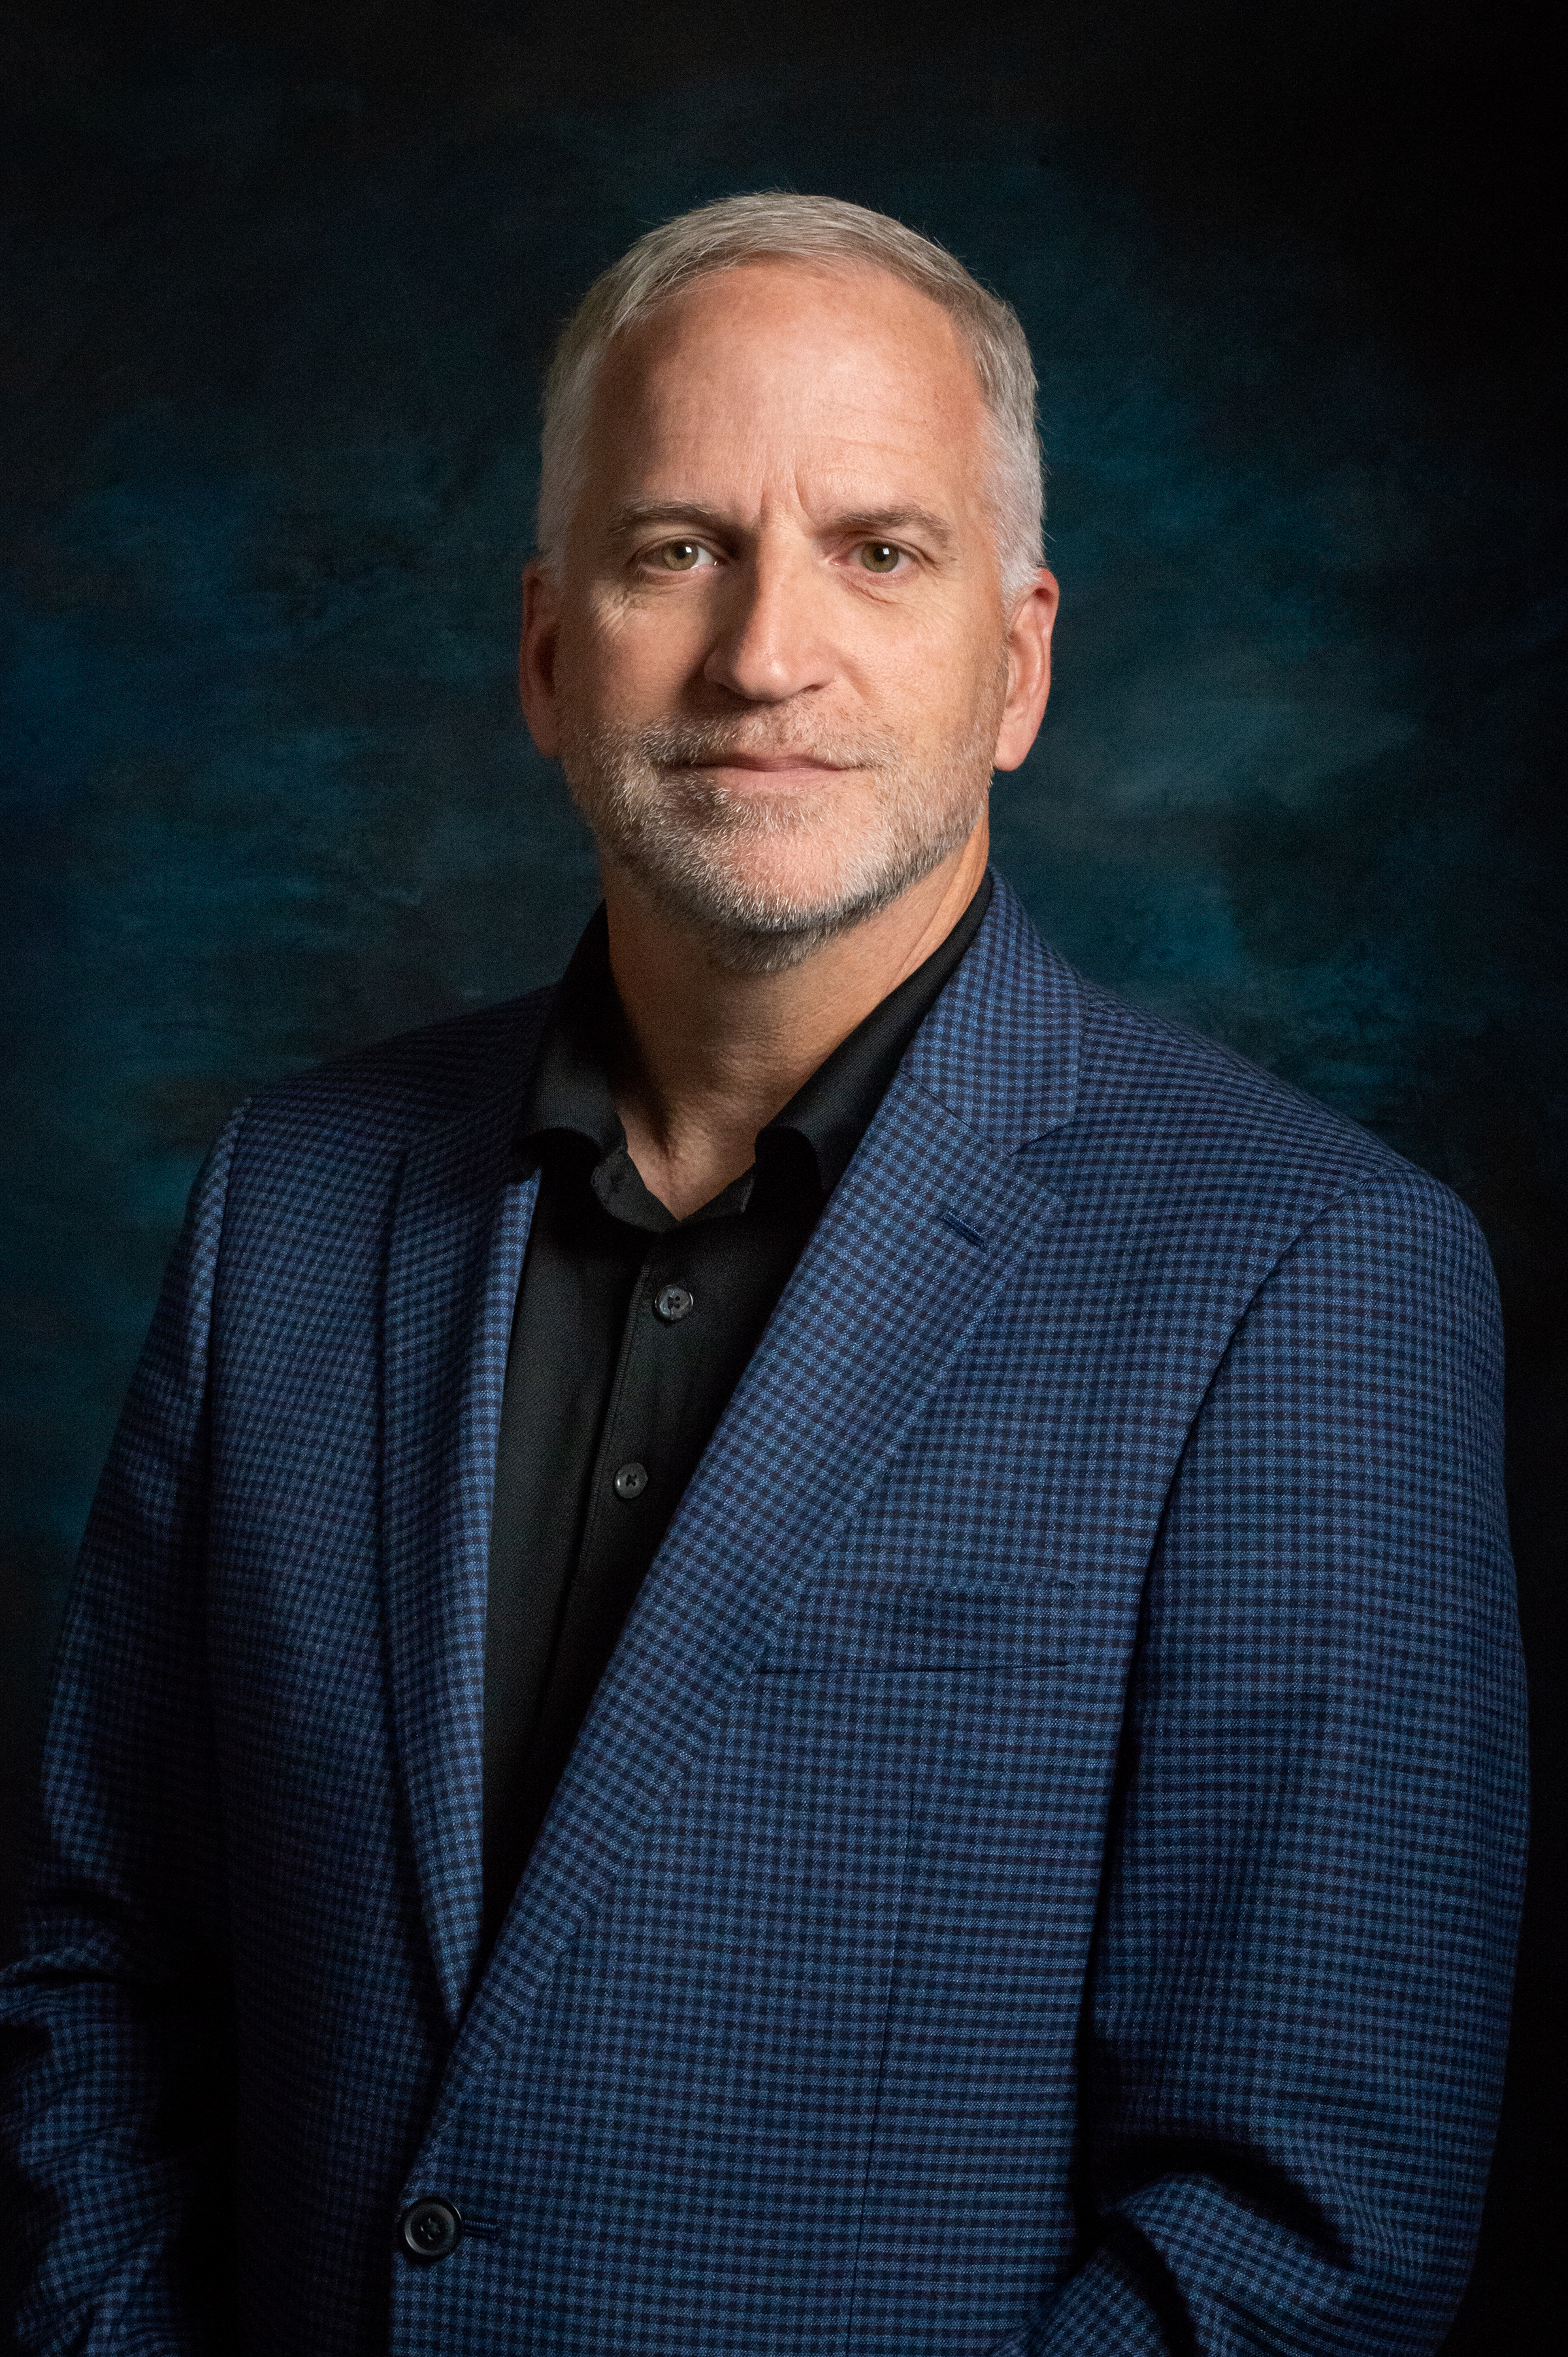 Robert Cardillo, Chairman and Chief Strategist of Planet Federal